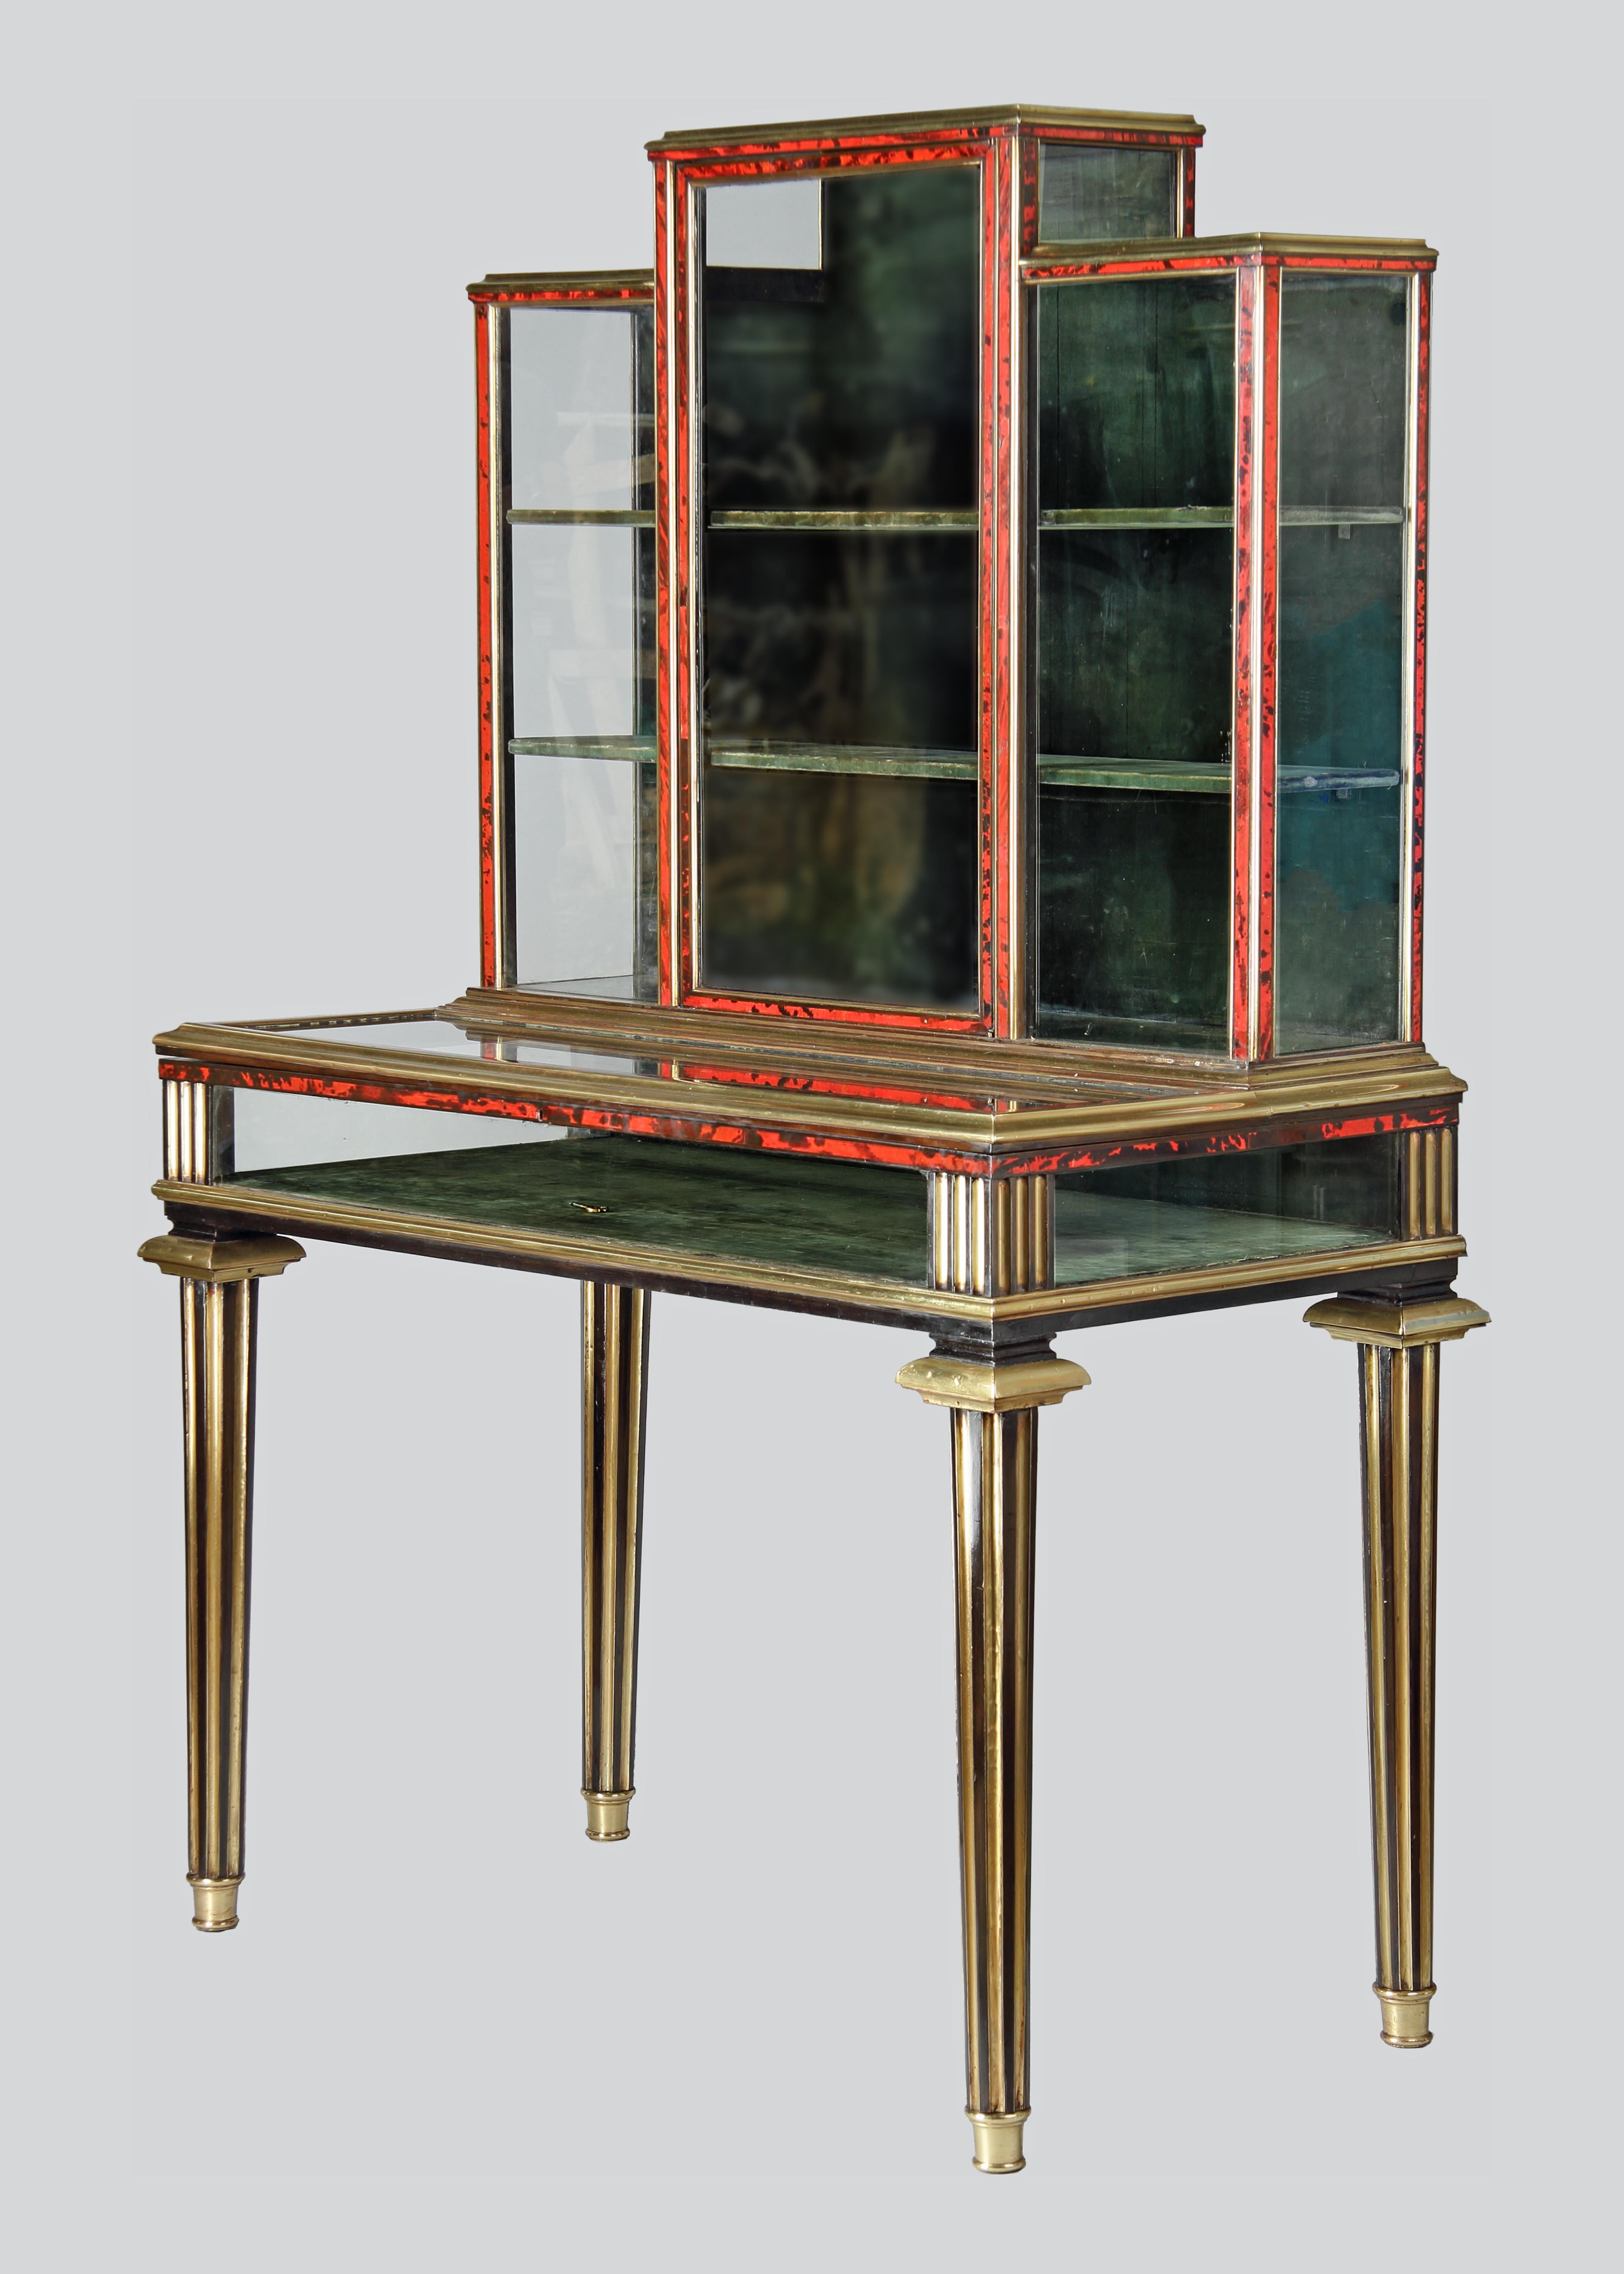 A Superb Pair of French Brass Mounted Tortoiseshell Veneered Collectors Cabinets in the Louis XVI Style 
Wood, Glass, Brass, Tortoiseshell, Horn, Velvet
France, Napoleon III 
Circa 1865 - 1870 

SIZE: 161cm high, 108cm wide, 58cm deep - 63⅓ ins